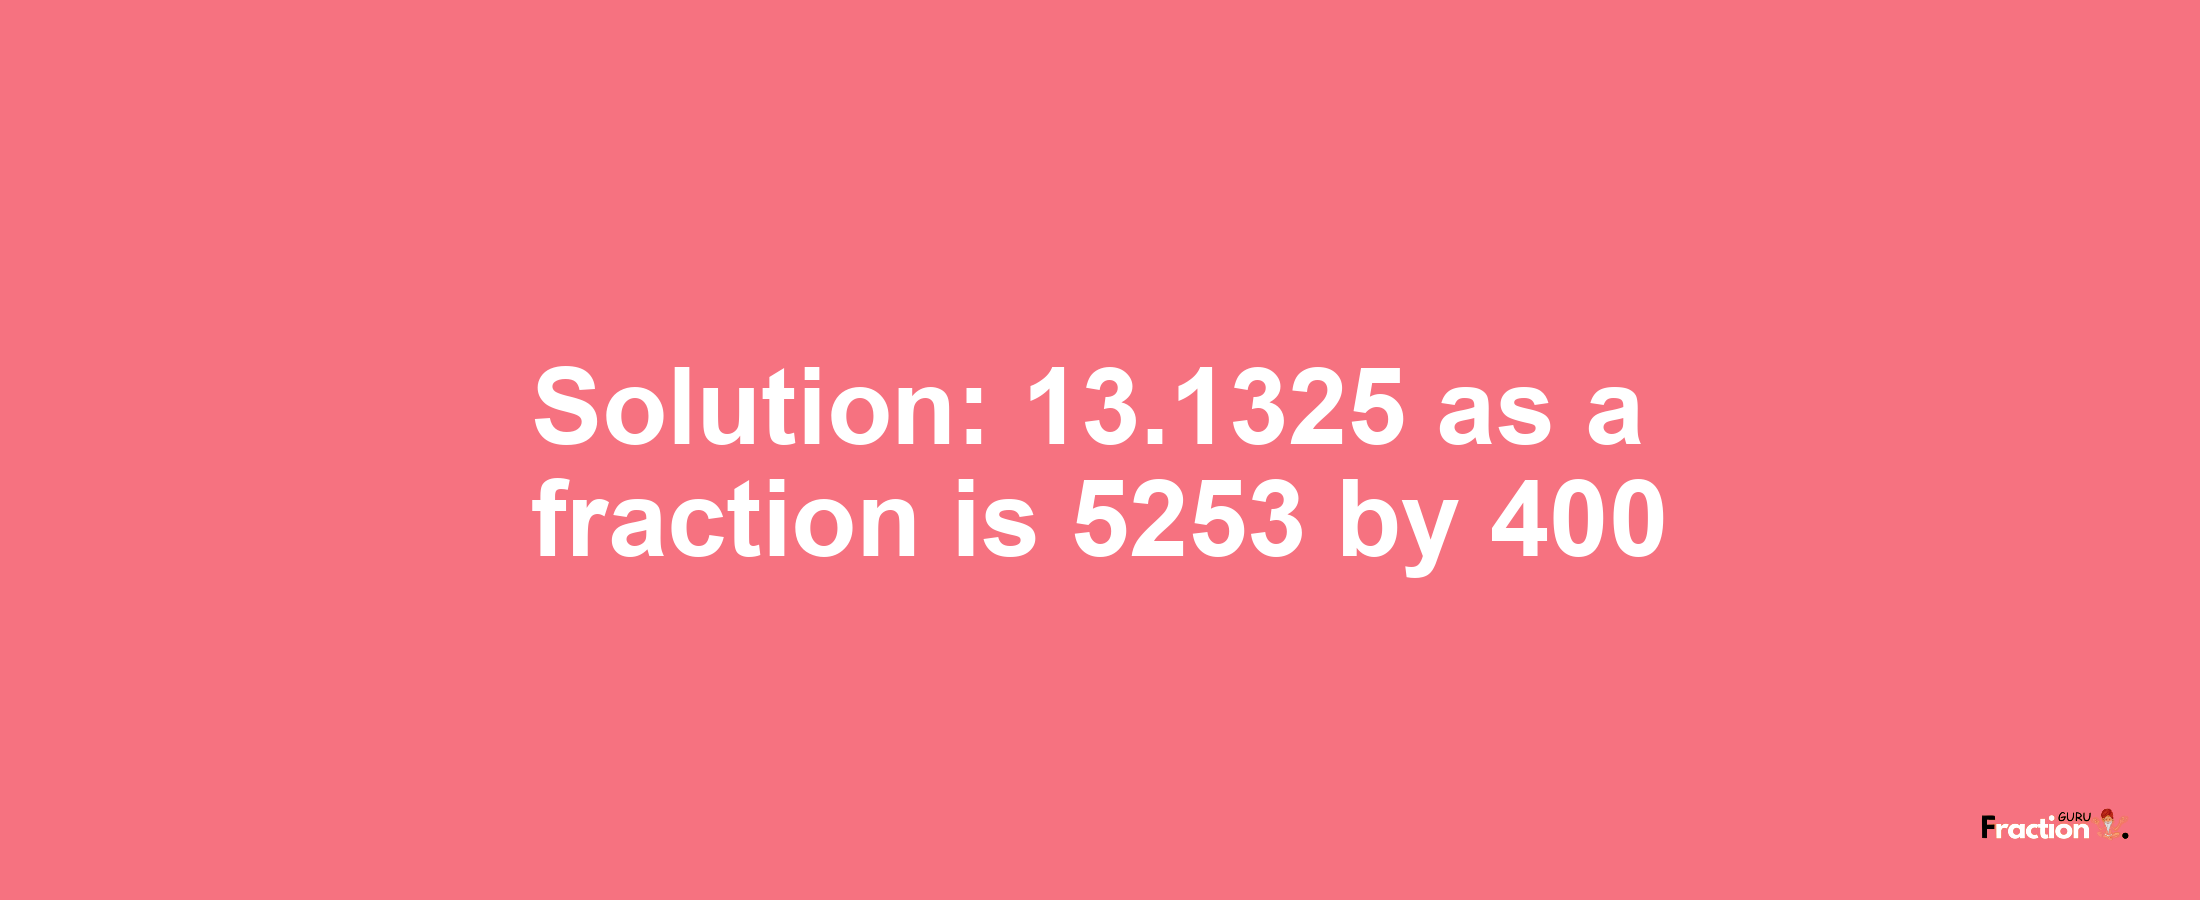 Solution:13.1325 as a fraction is 5253/400